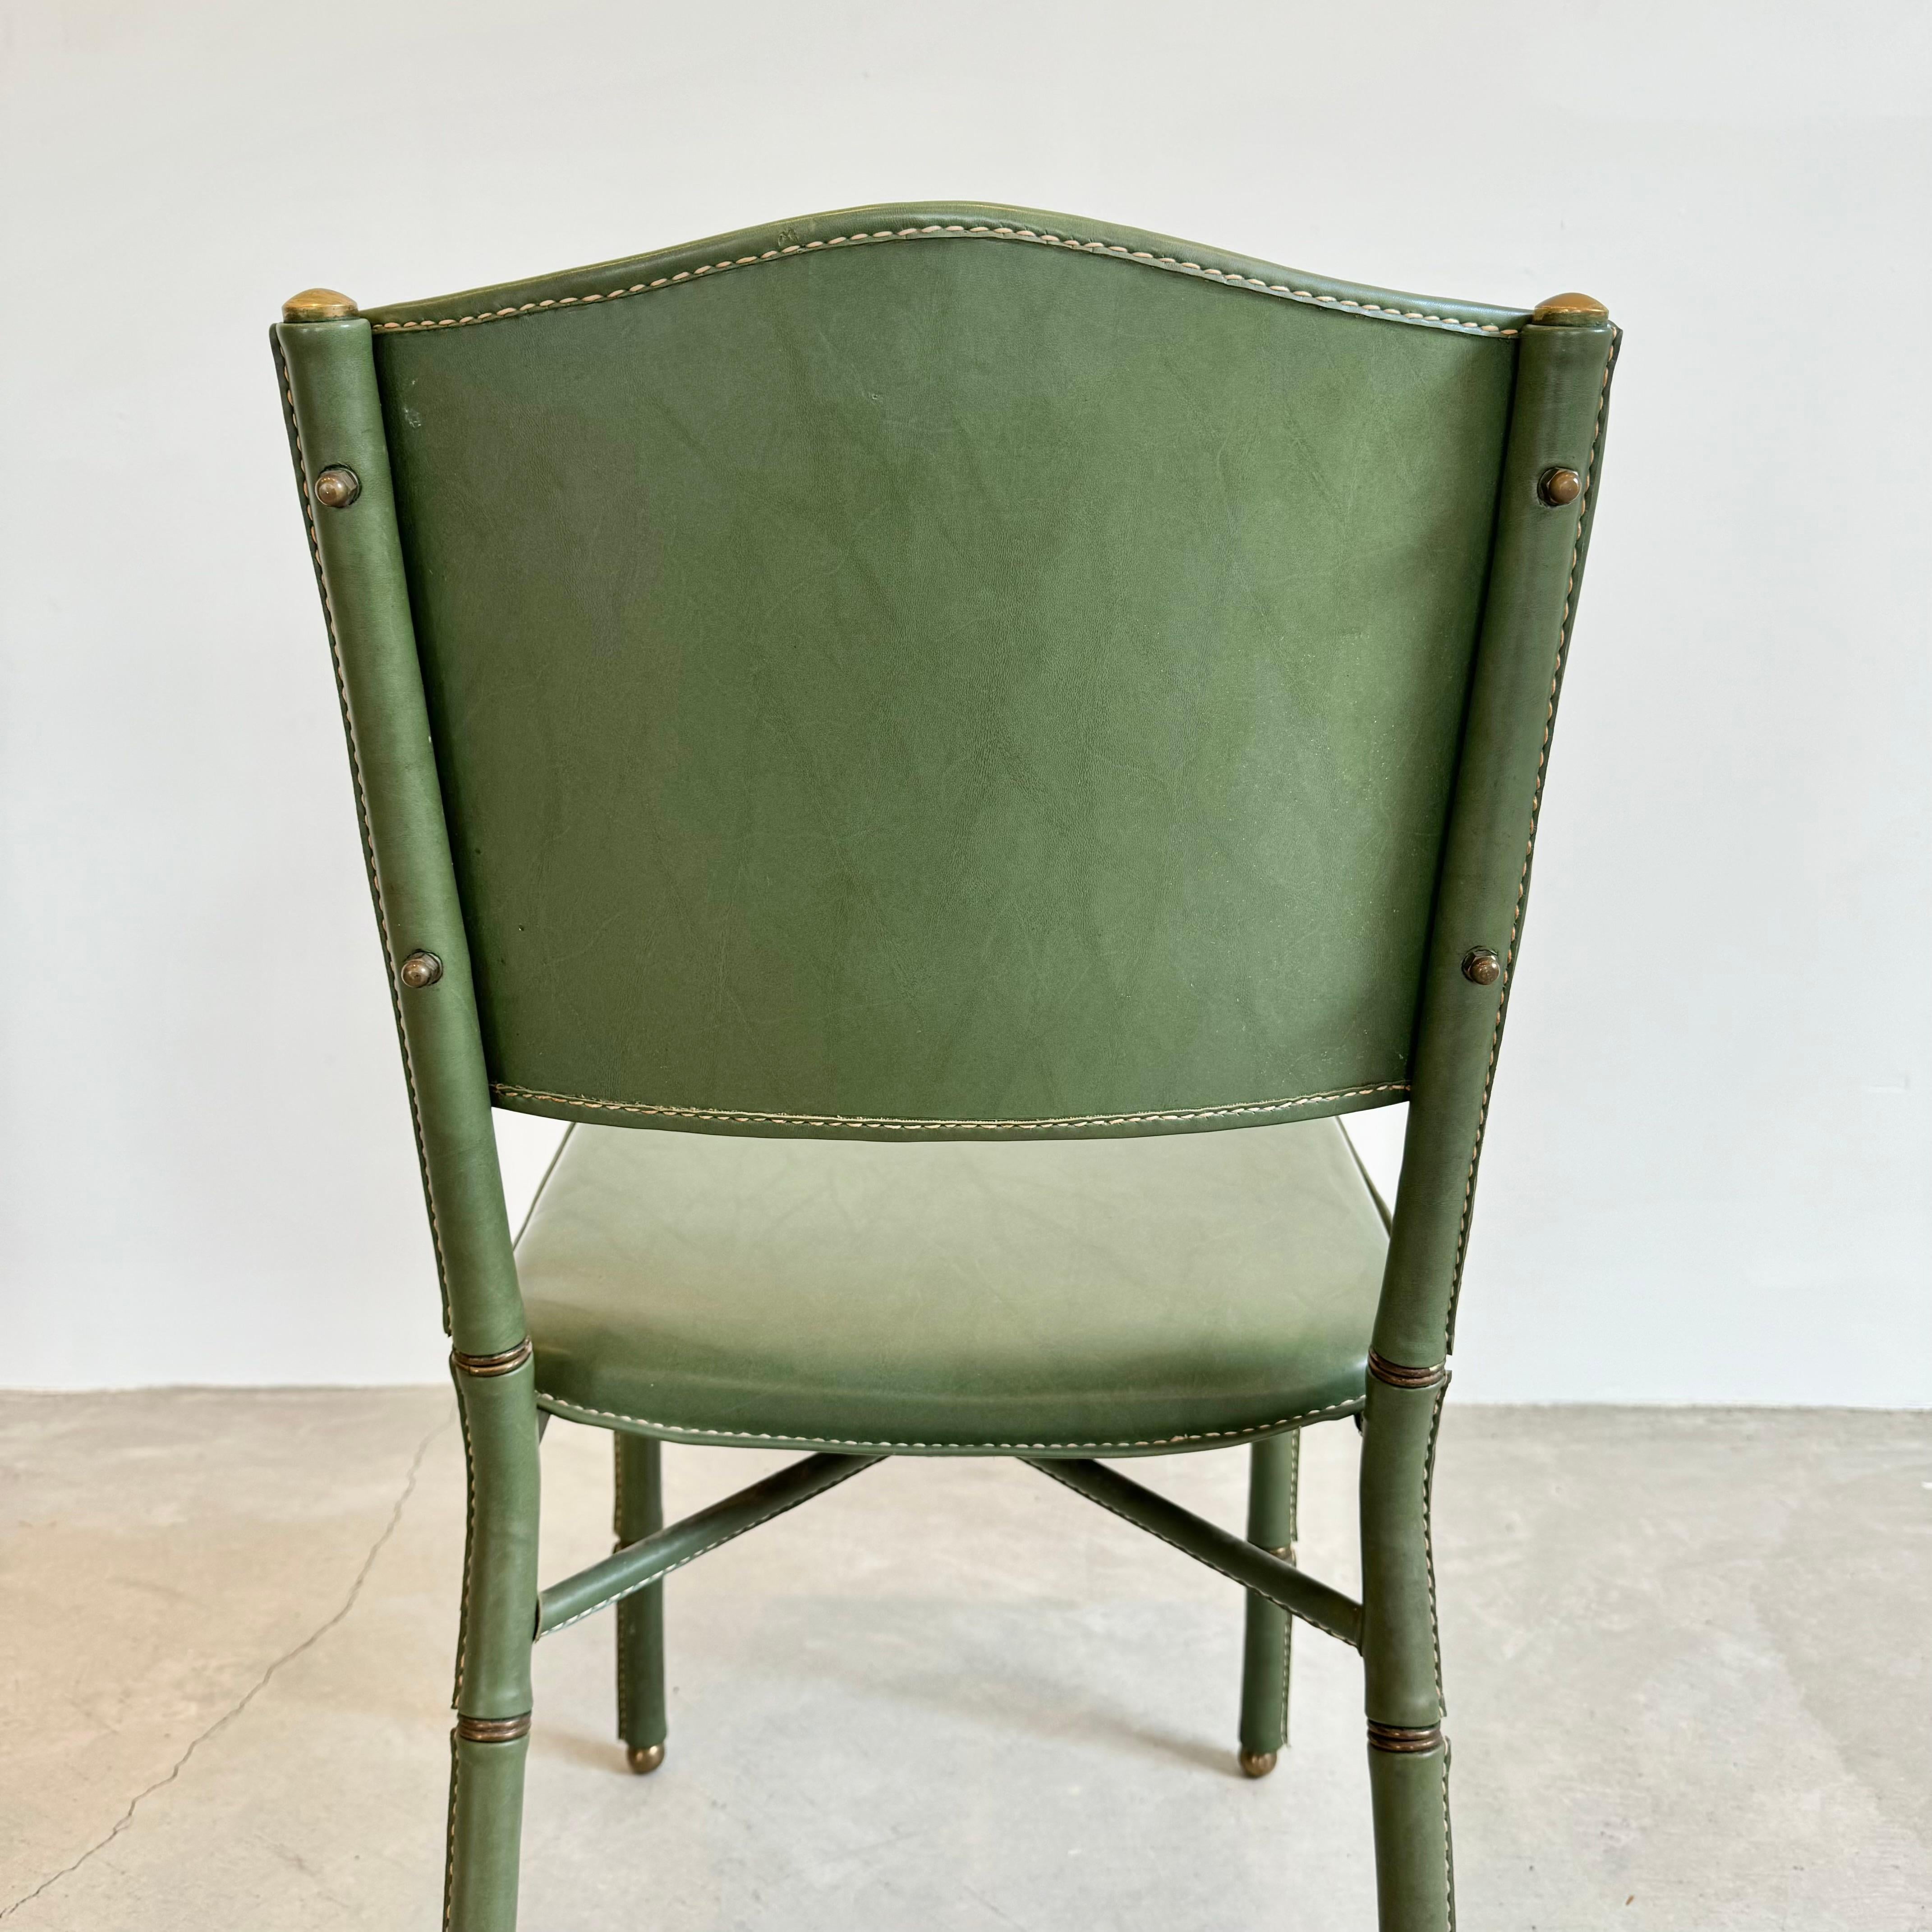 Jacques Adnet Green Leather Chairs, Circa 1950s, France For Sale 2